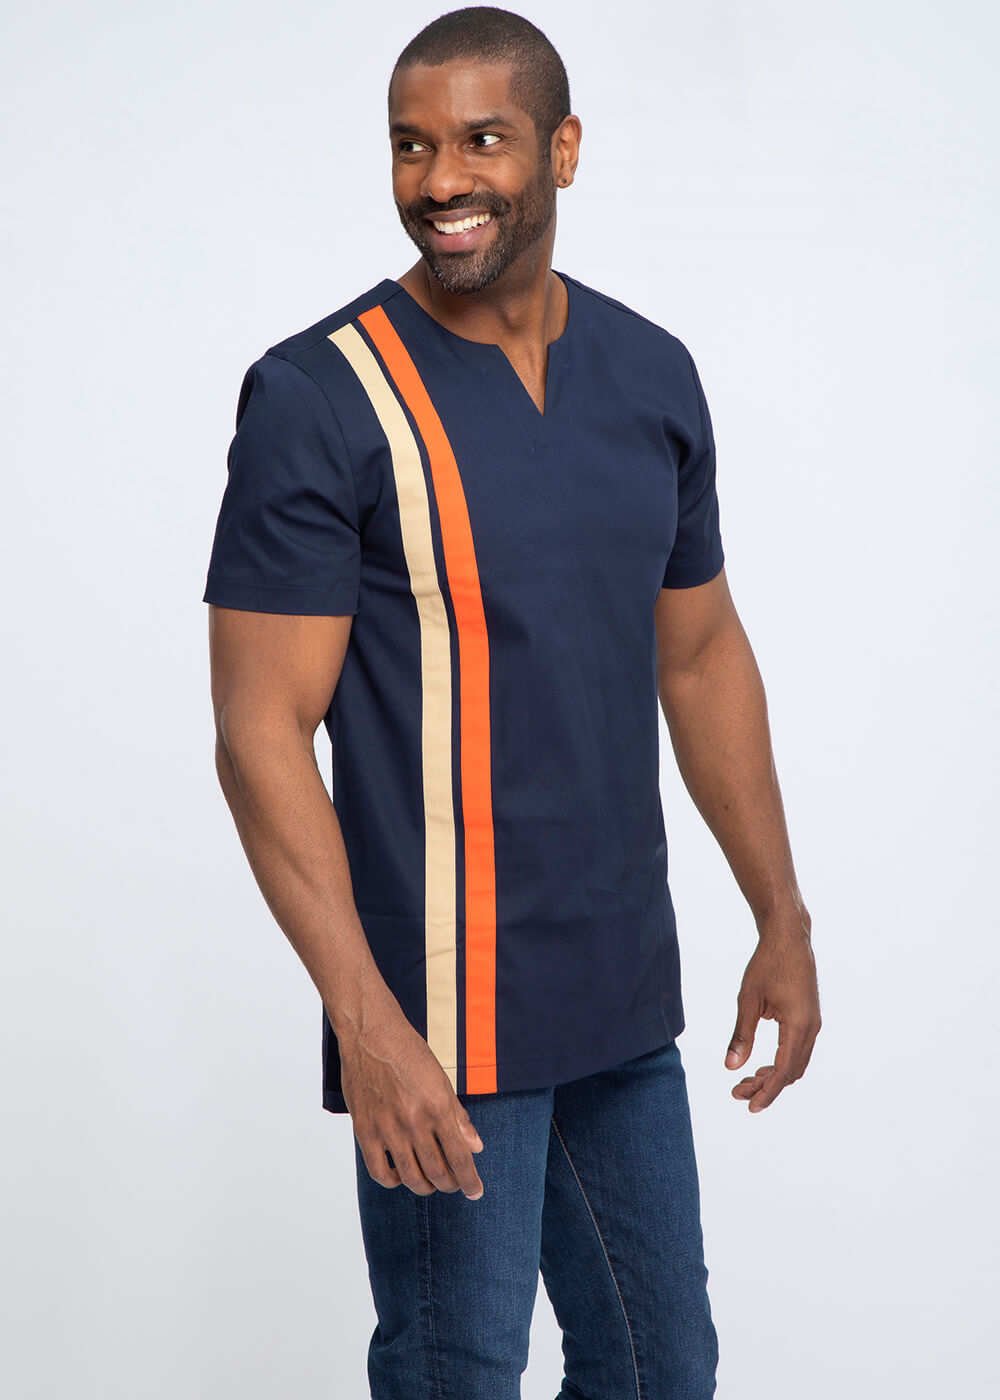 Samaki Men's Short Sleeve Traditional Top (Navy with Tan and Orange Stripes)